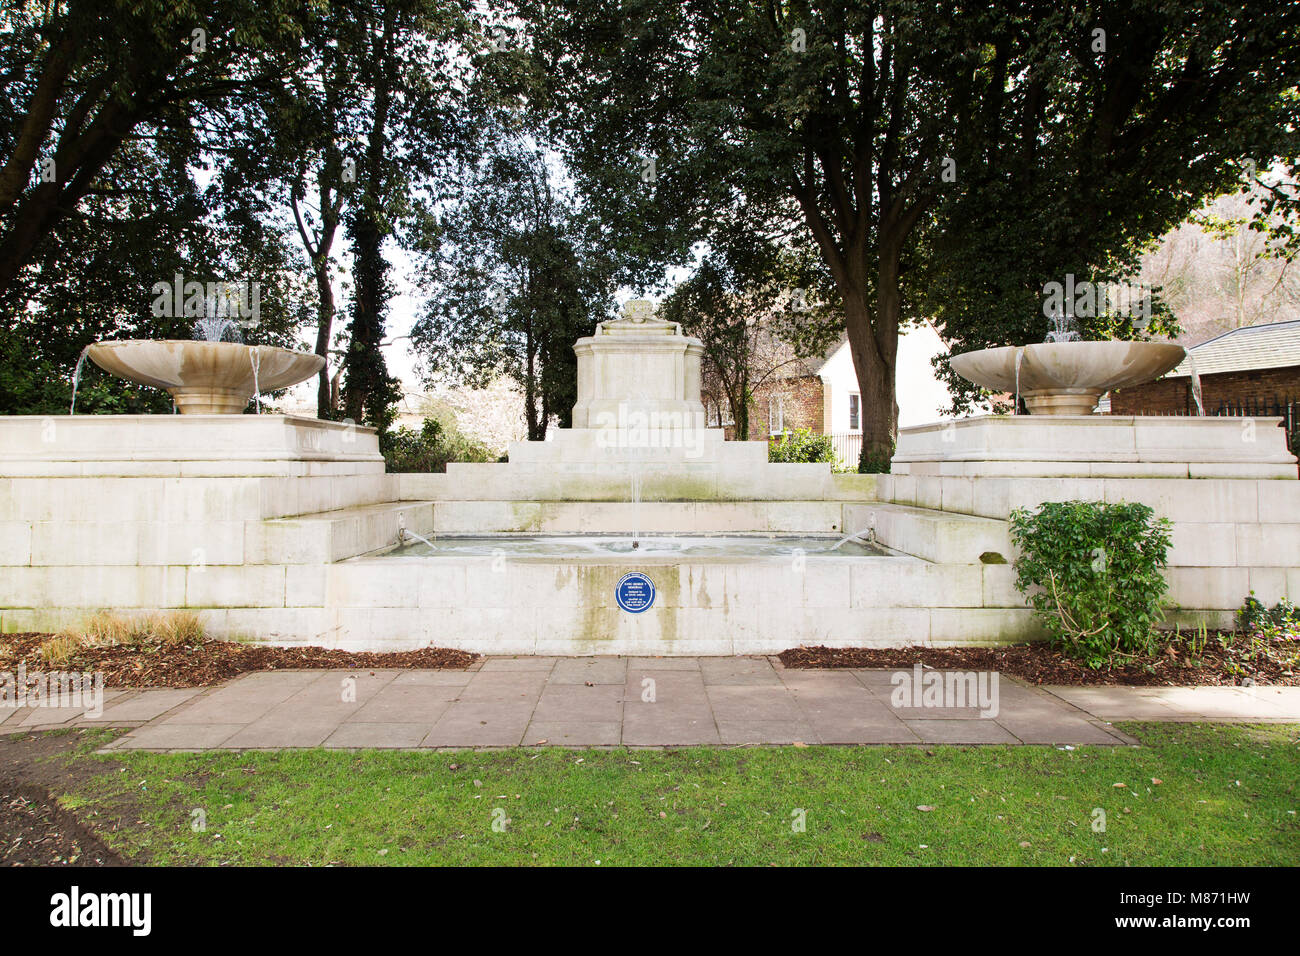 The George V Memorial Fountain in Windsor, England. The fountain was designed by Sir Edwin Lutyens and was unveiled by King George VI on 23 April 1937 Stock Photo